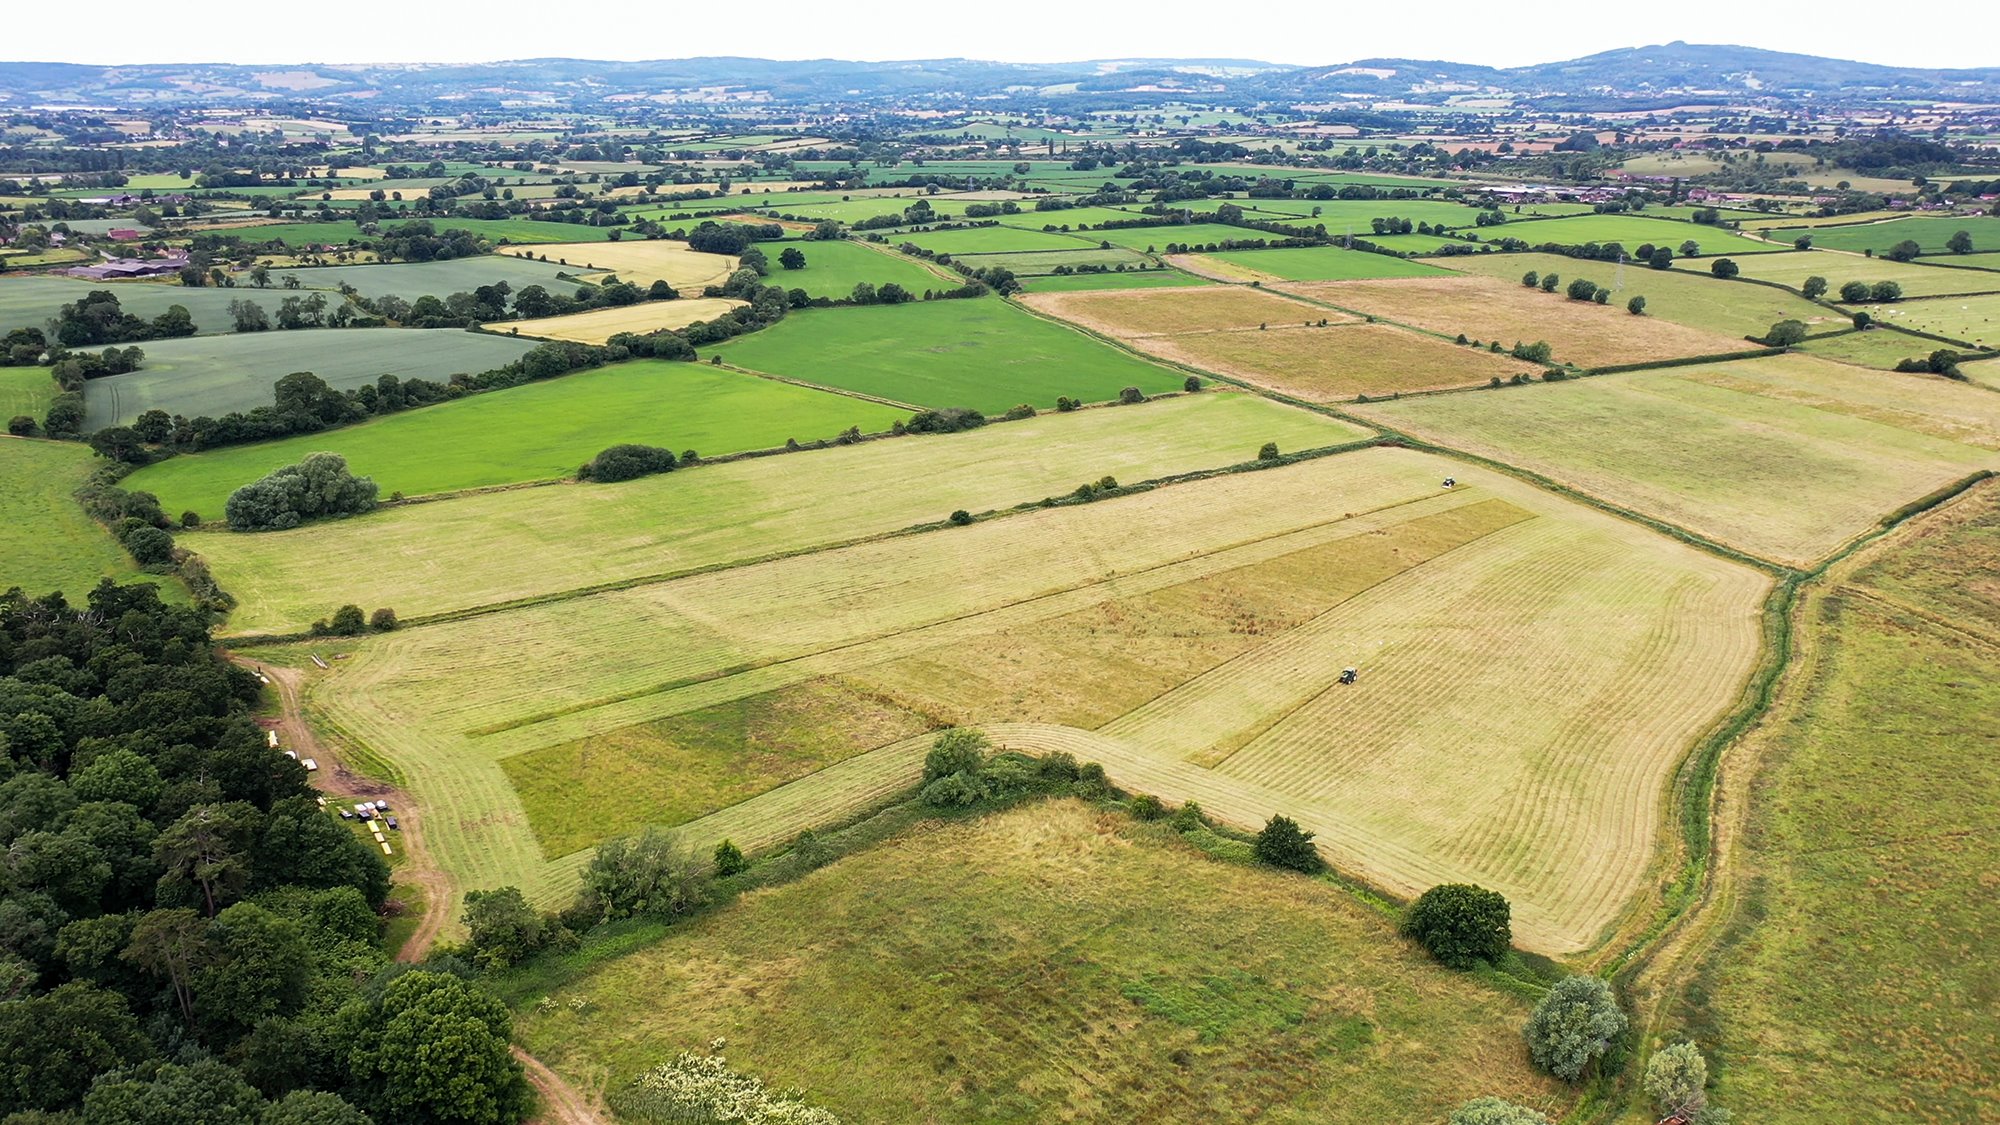 Ariel view showing a field that will be the home to a new wetland habitat in the Cotswolds